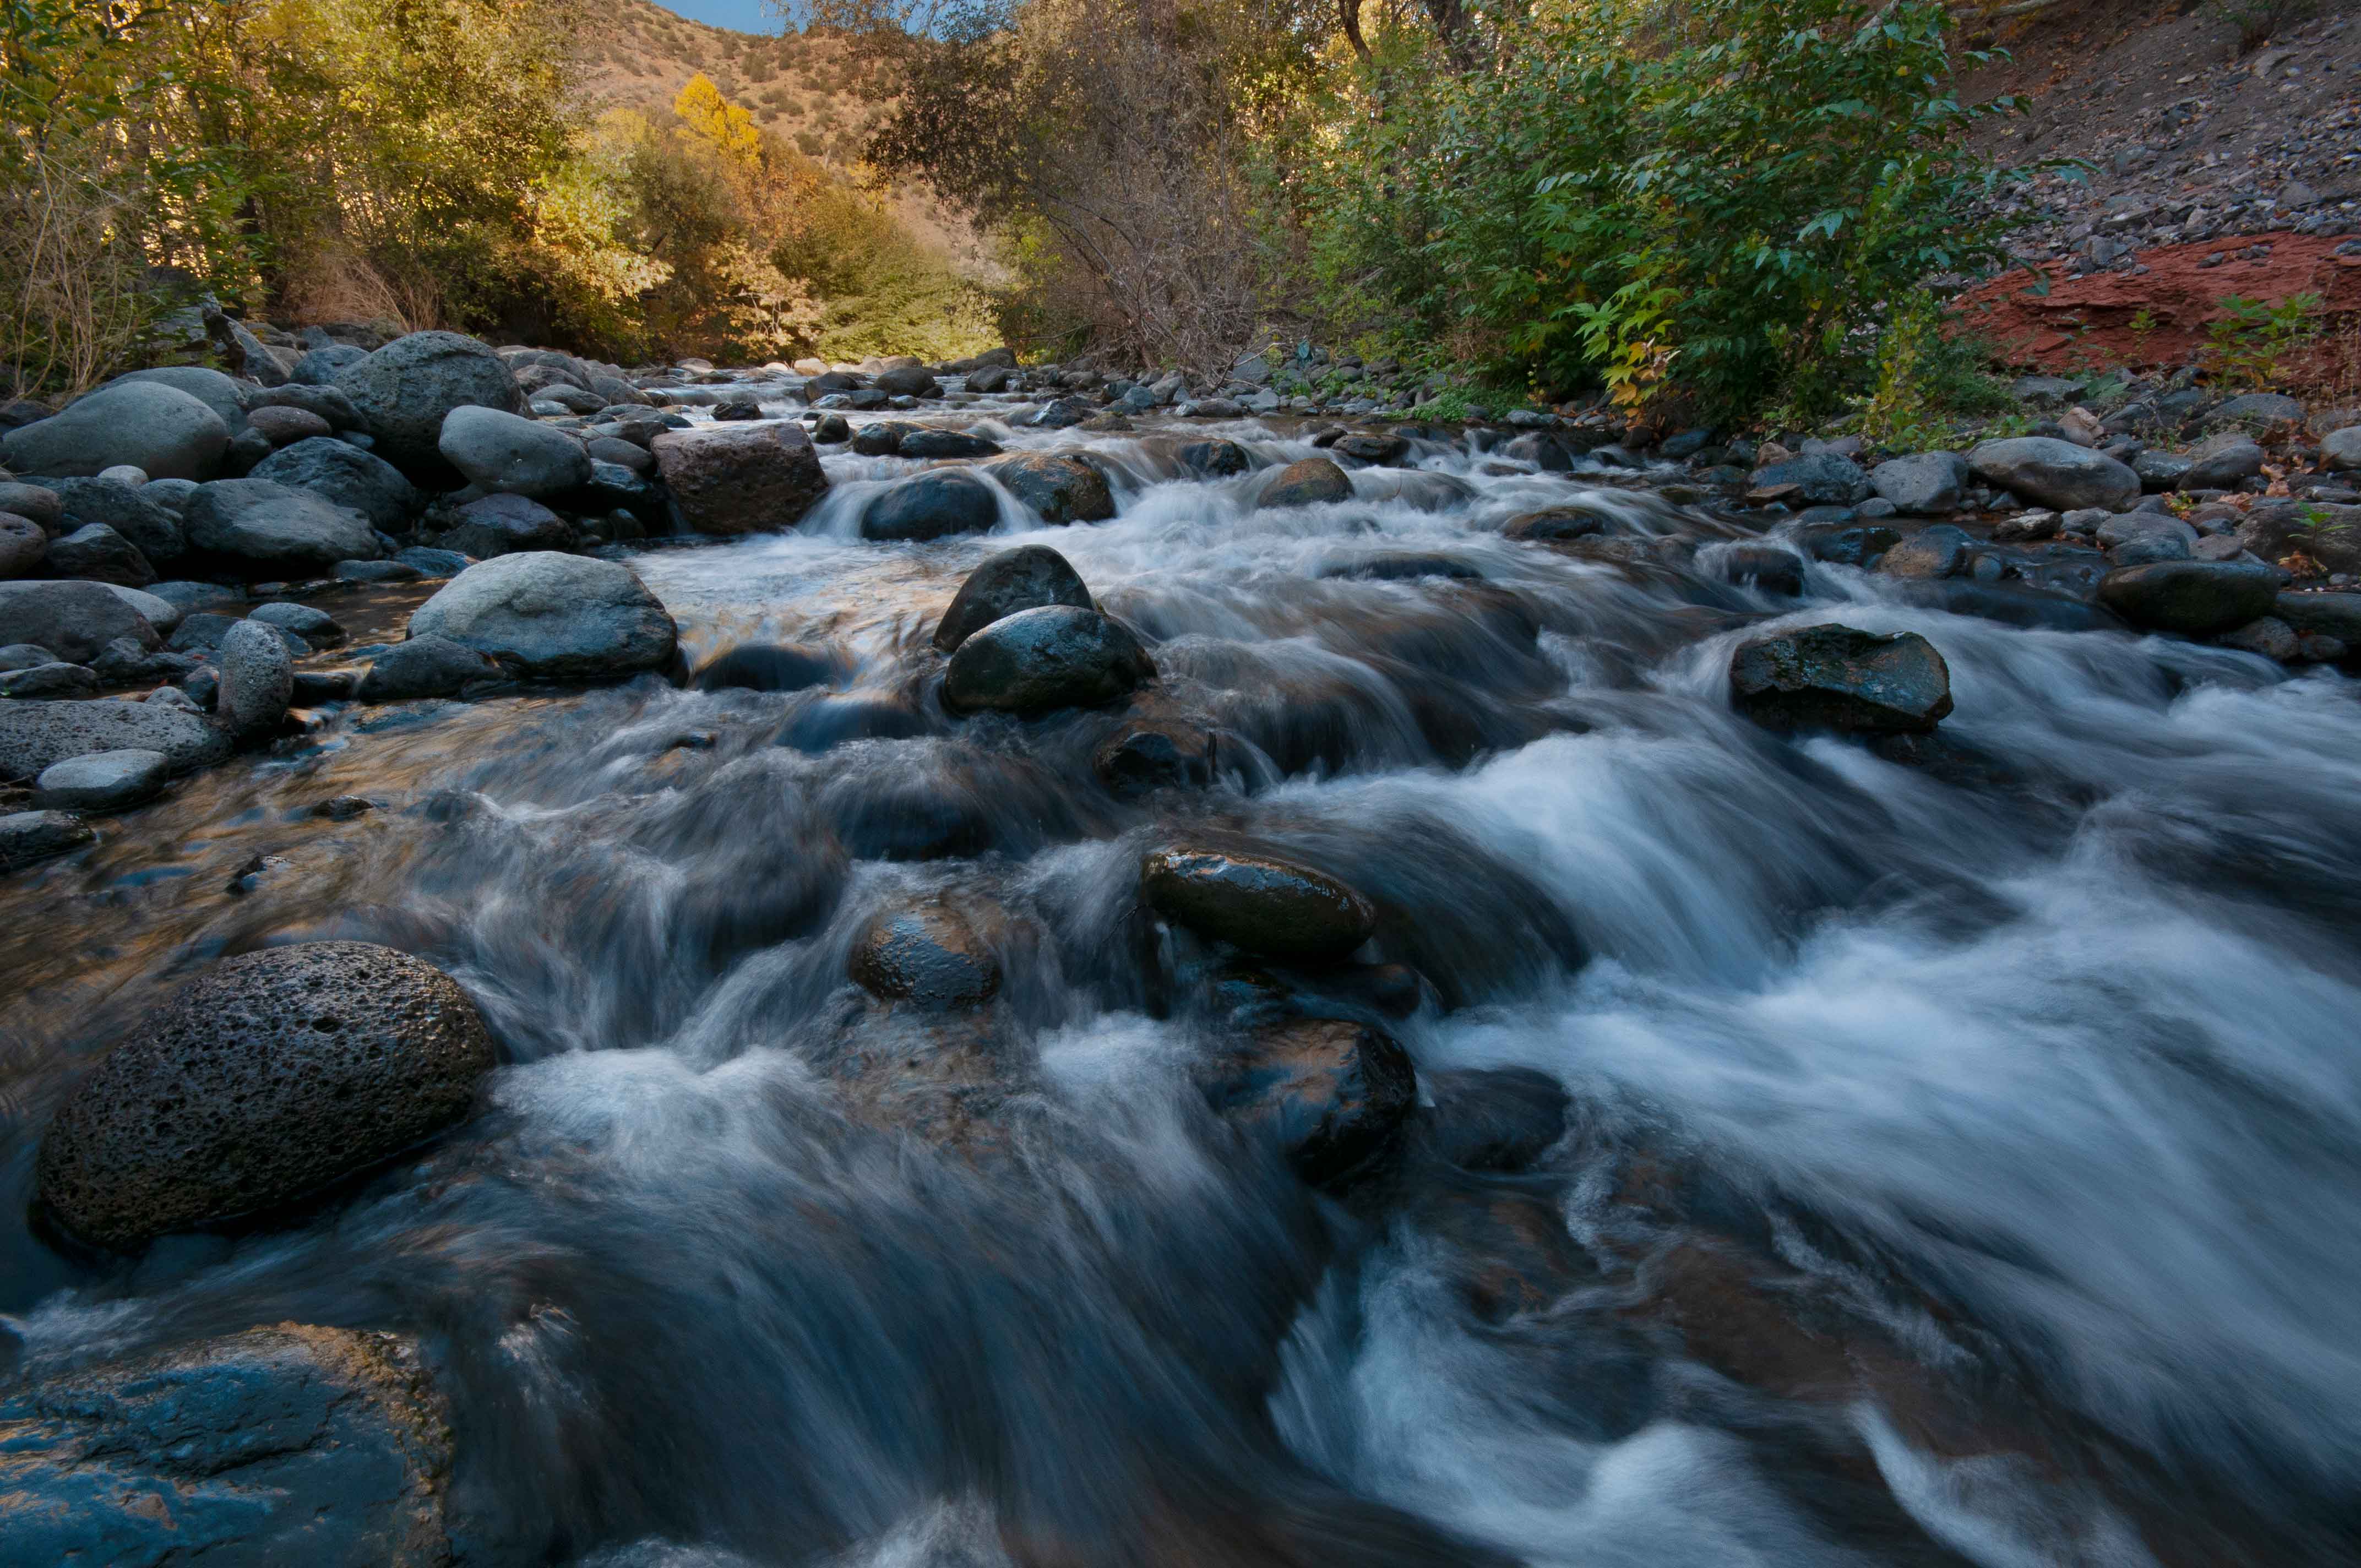 Rocks, rapids, water and trees in West Clear Creek, Arizona